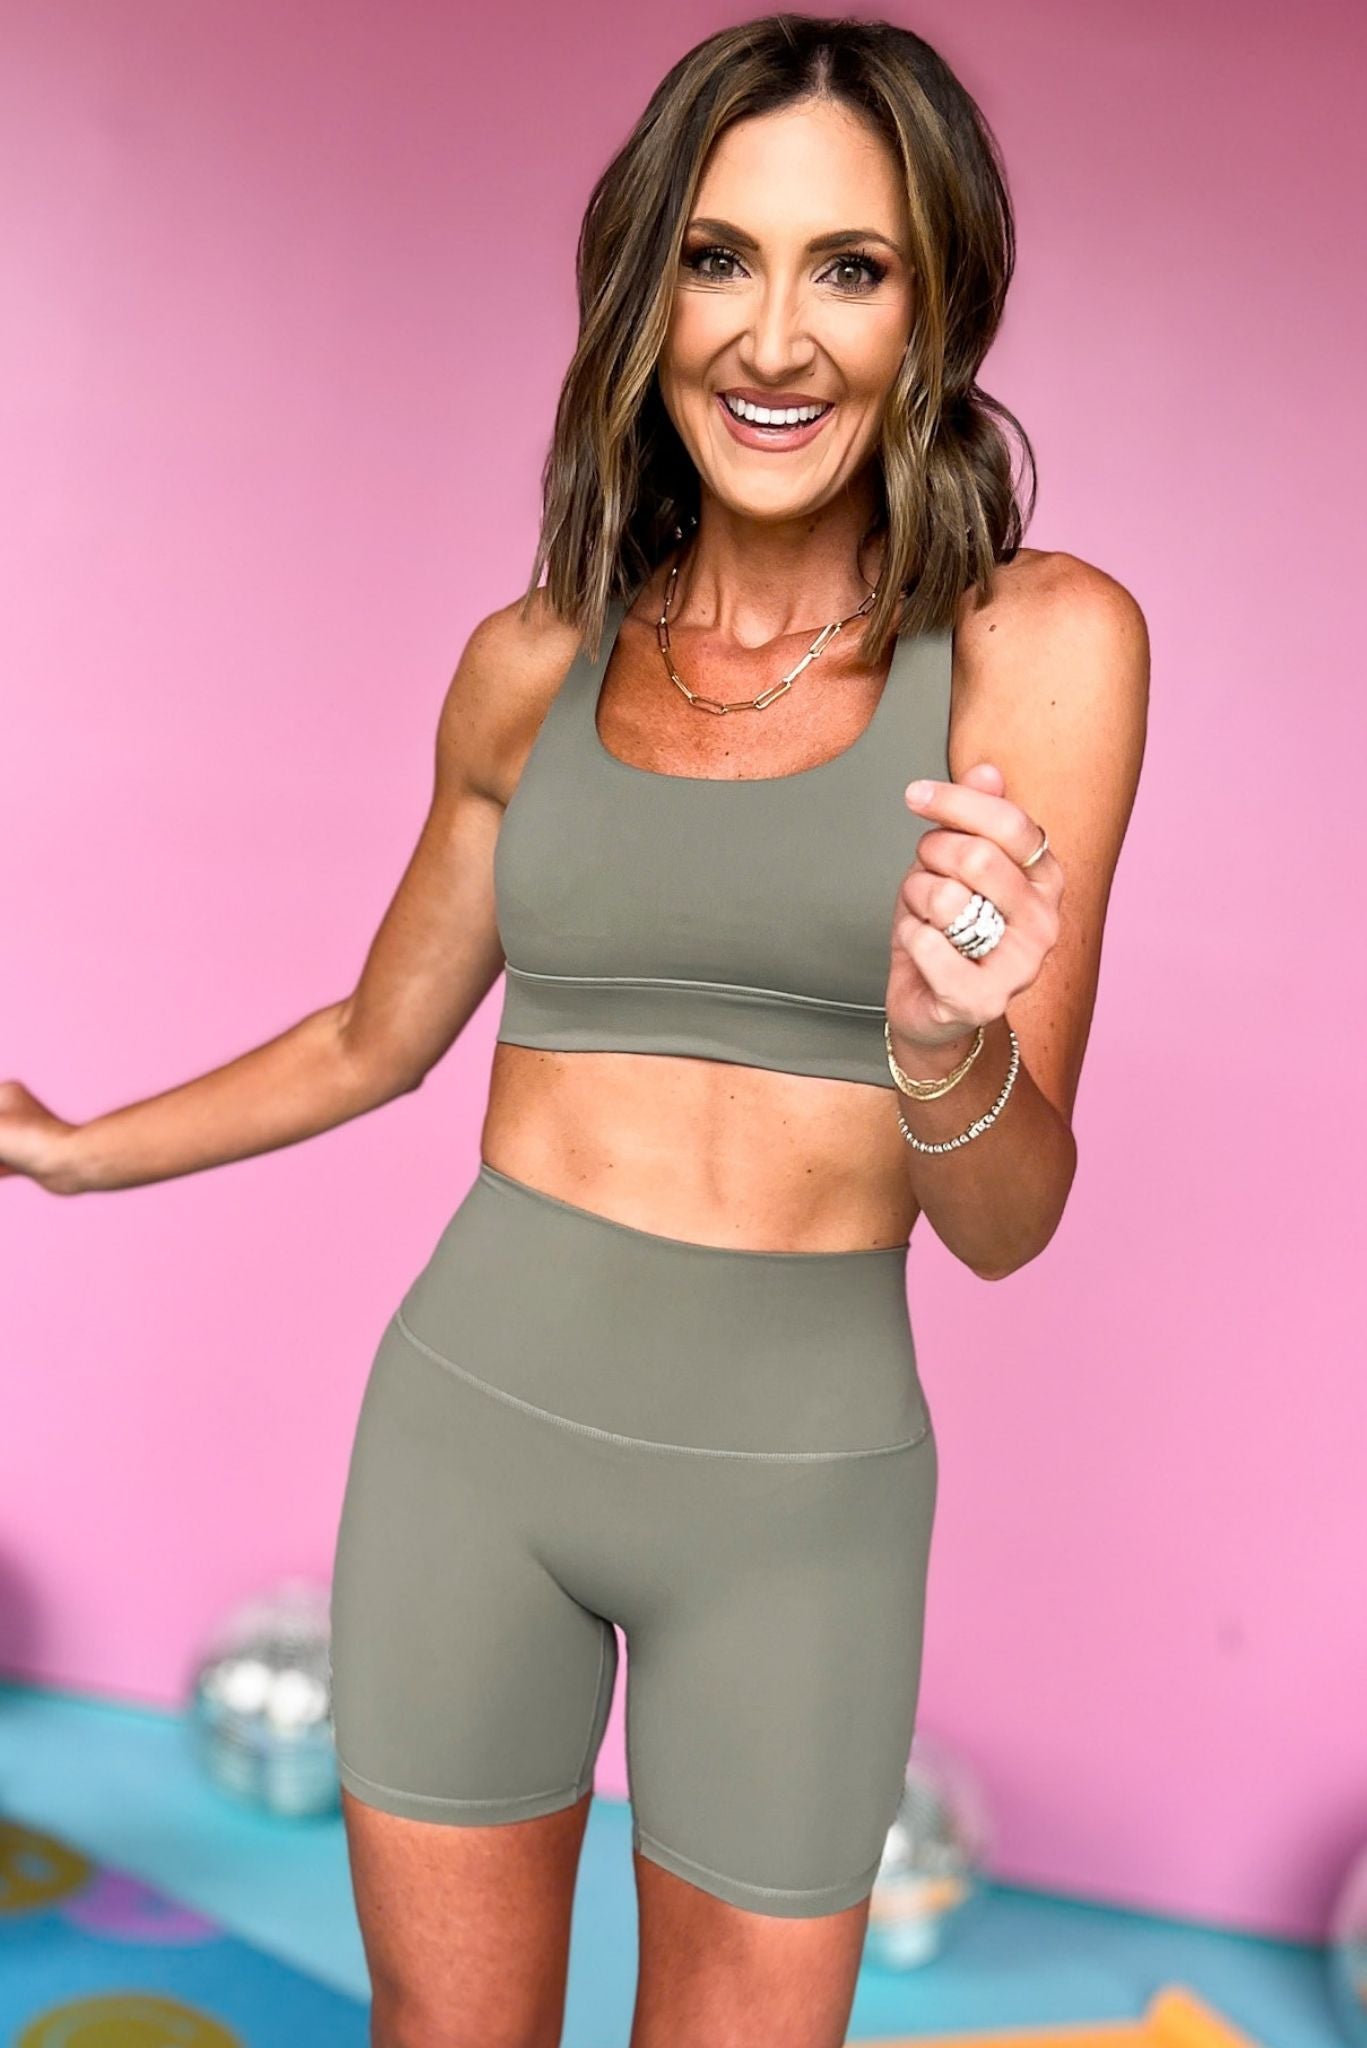 SSYS Moss Green Incognito Biker Shorts, Spring athleisure, athleisure, elevated athleisure, must have biker shorts, athletic biker shorts, athletic style, mom style, shop style your senses by mallory fitzsimmons, ssys by mallory fitzsimmons